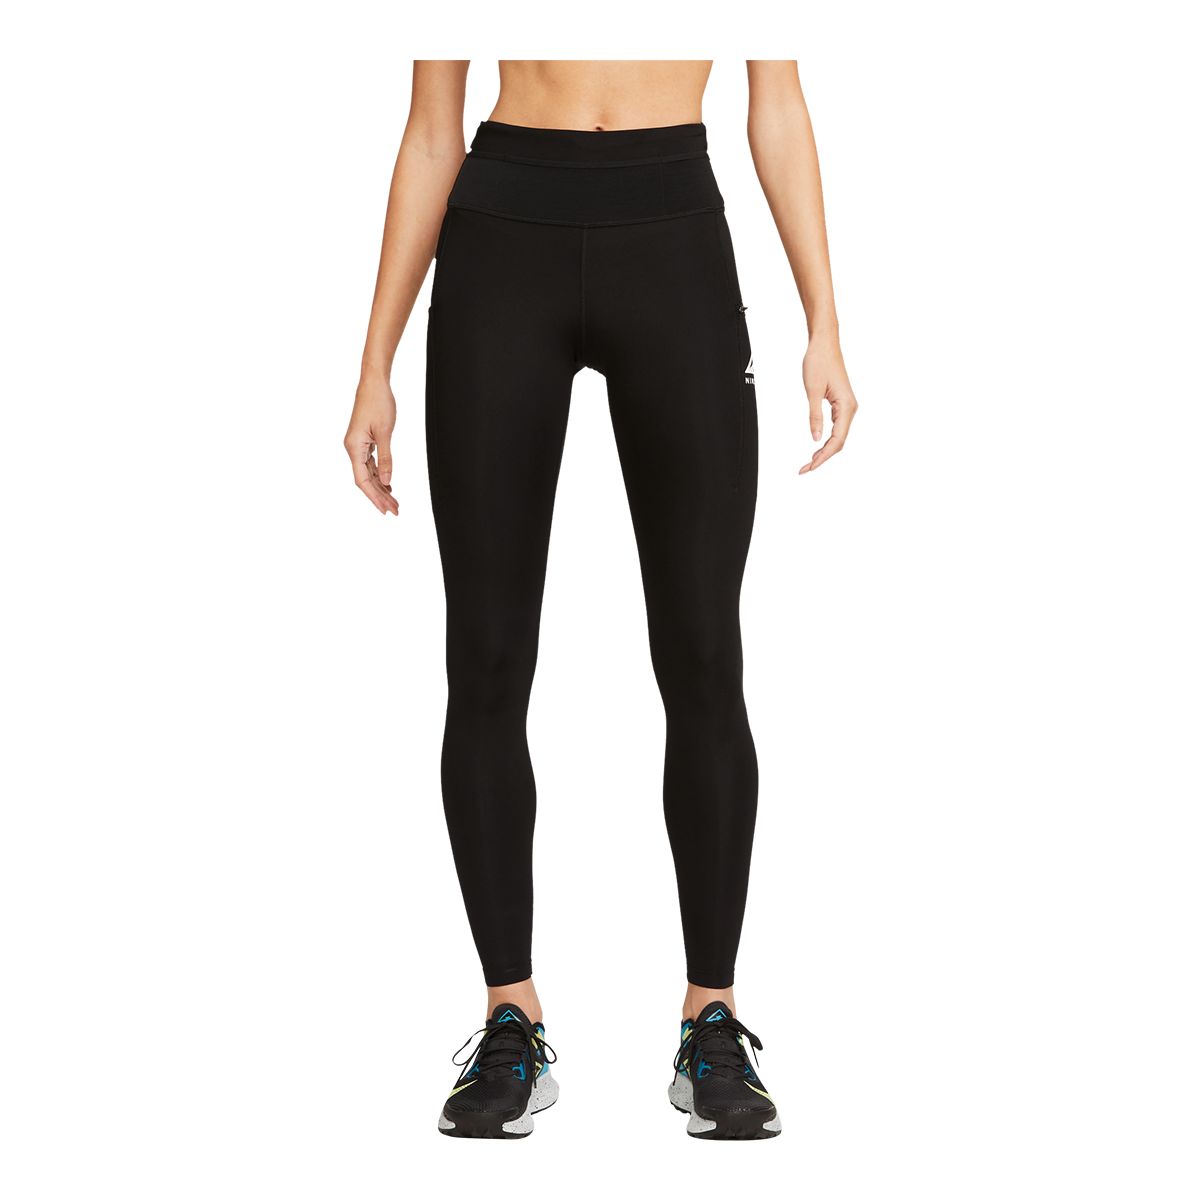 CV2253-010 New with tag Women Nike Epic Lux Power Flash Running Tight Pant  $140